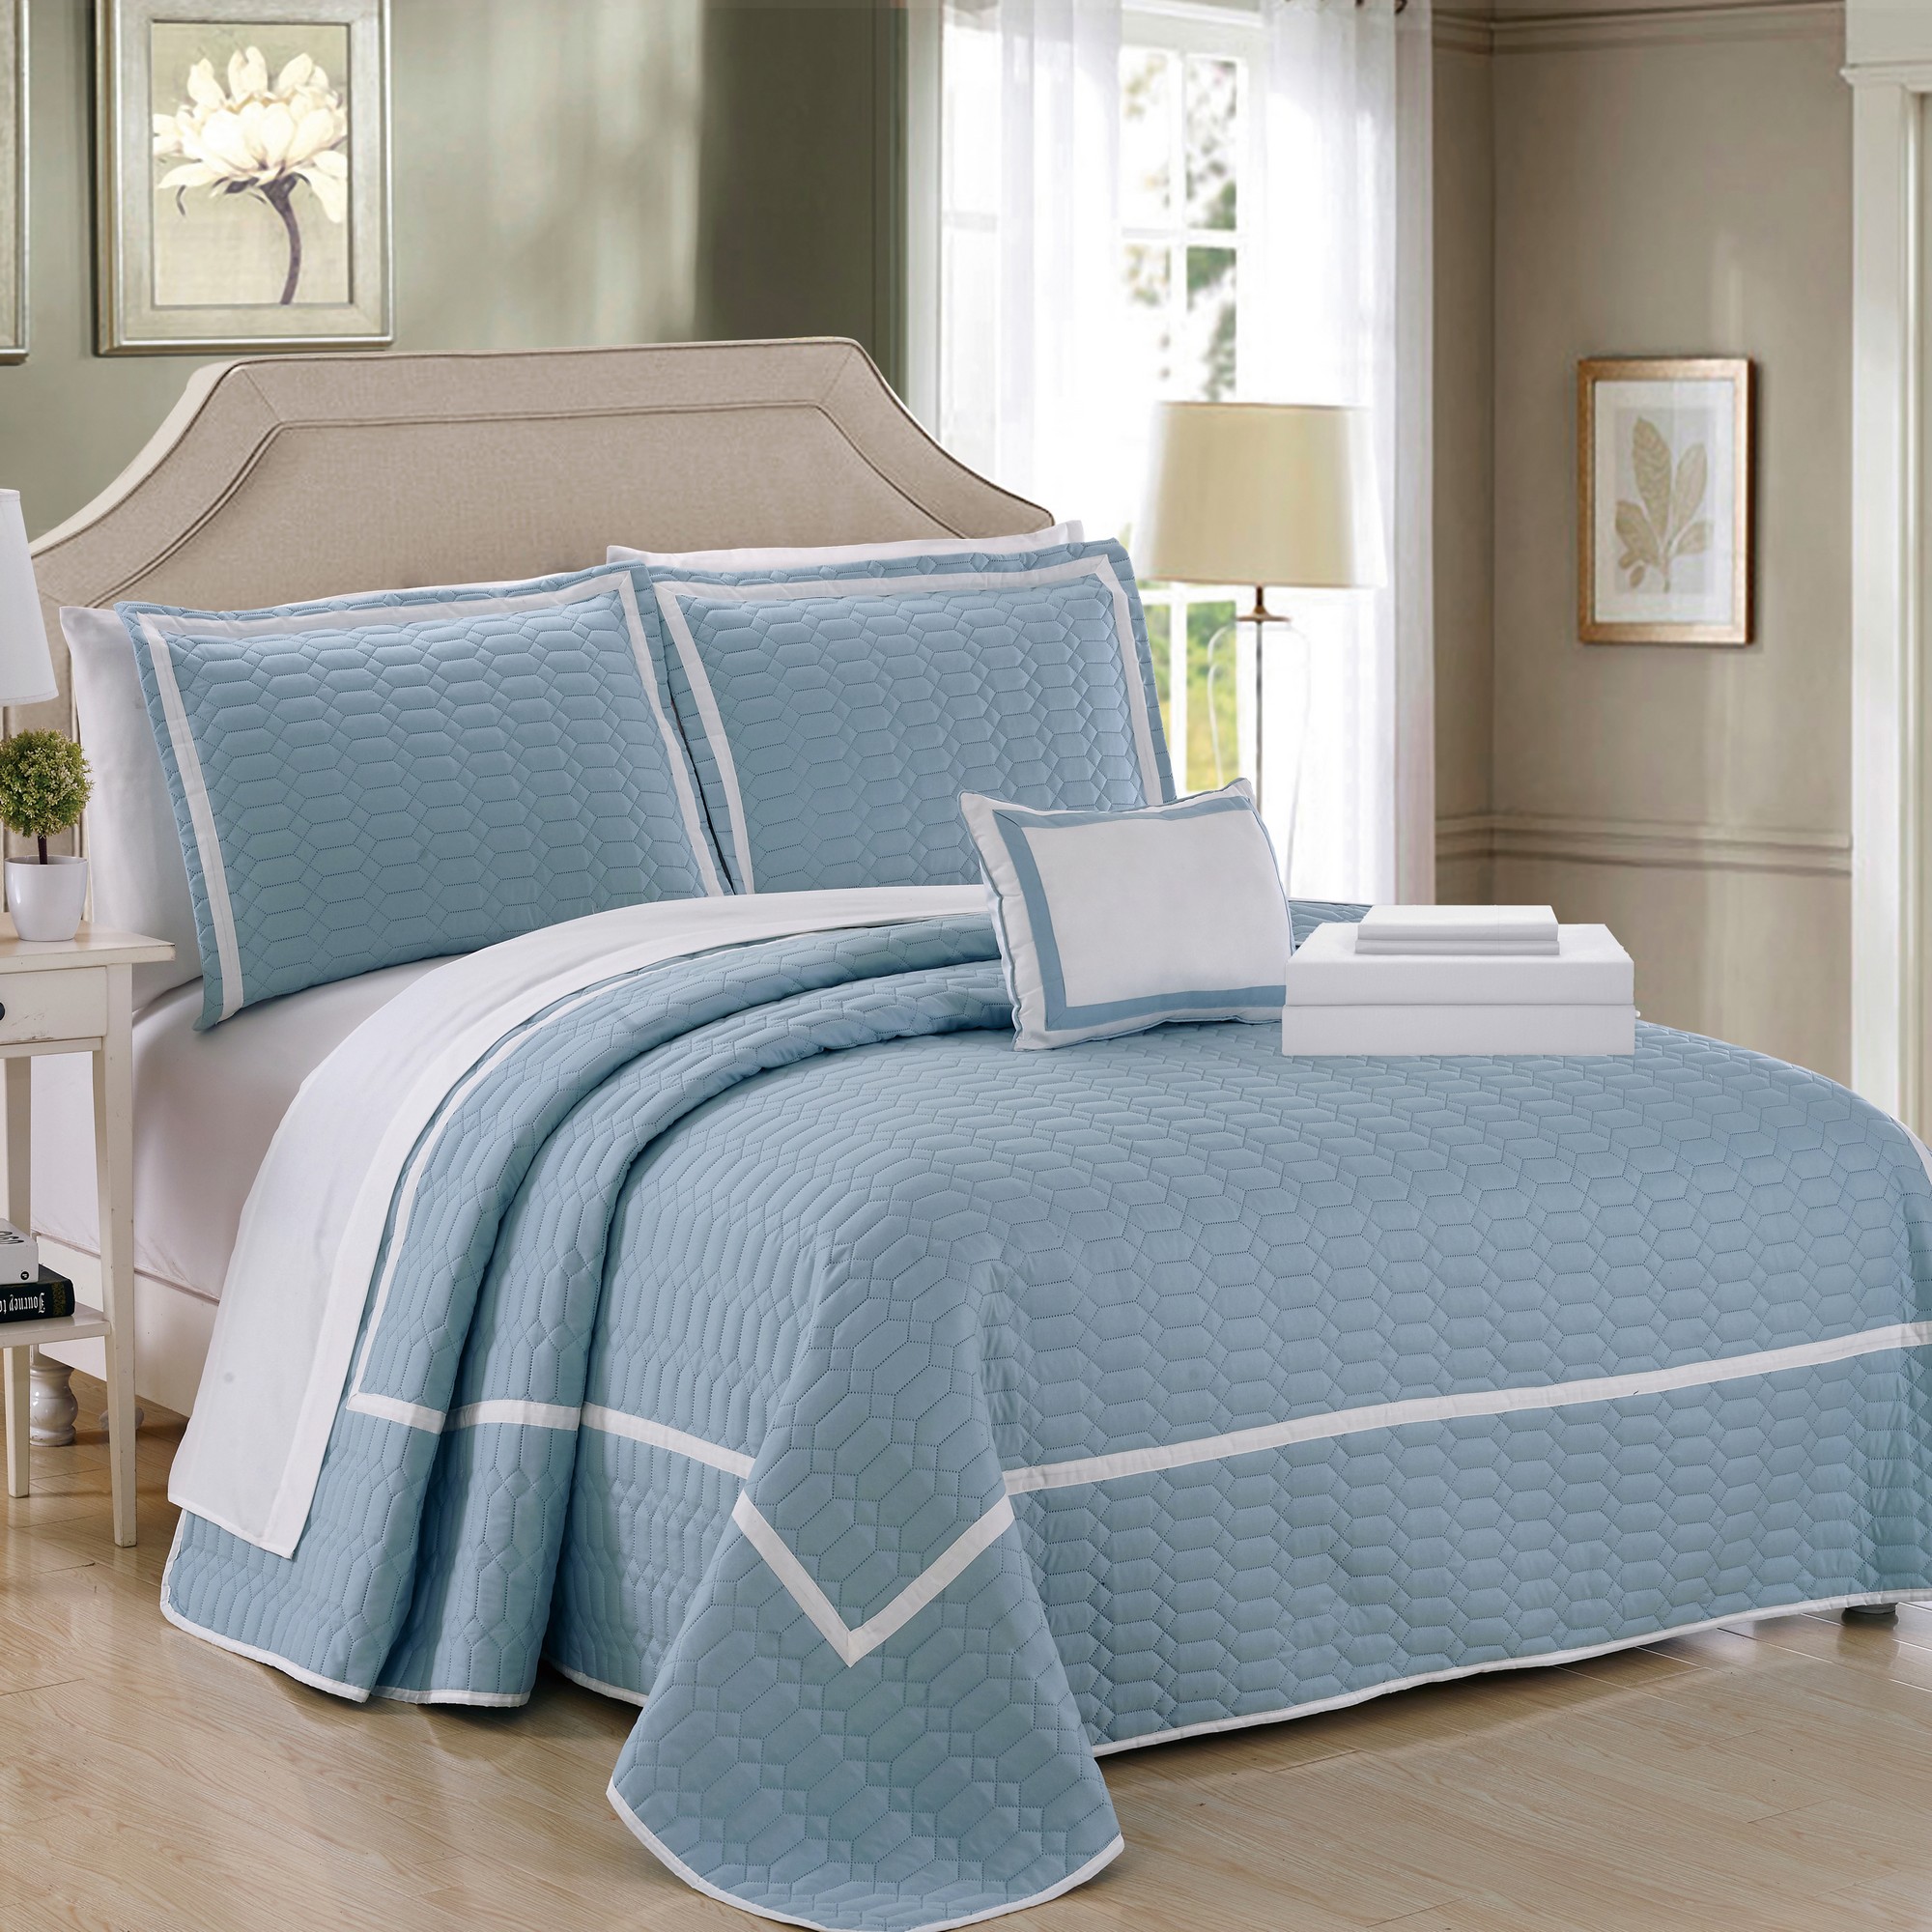 Antoine 8 Piece Quilted Bed in a Bag Sheets Decorative Pillows Shams Blue 